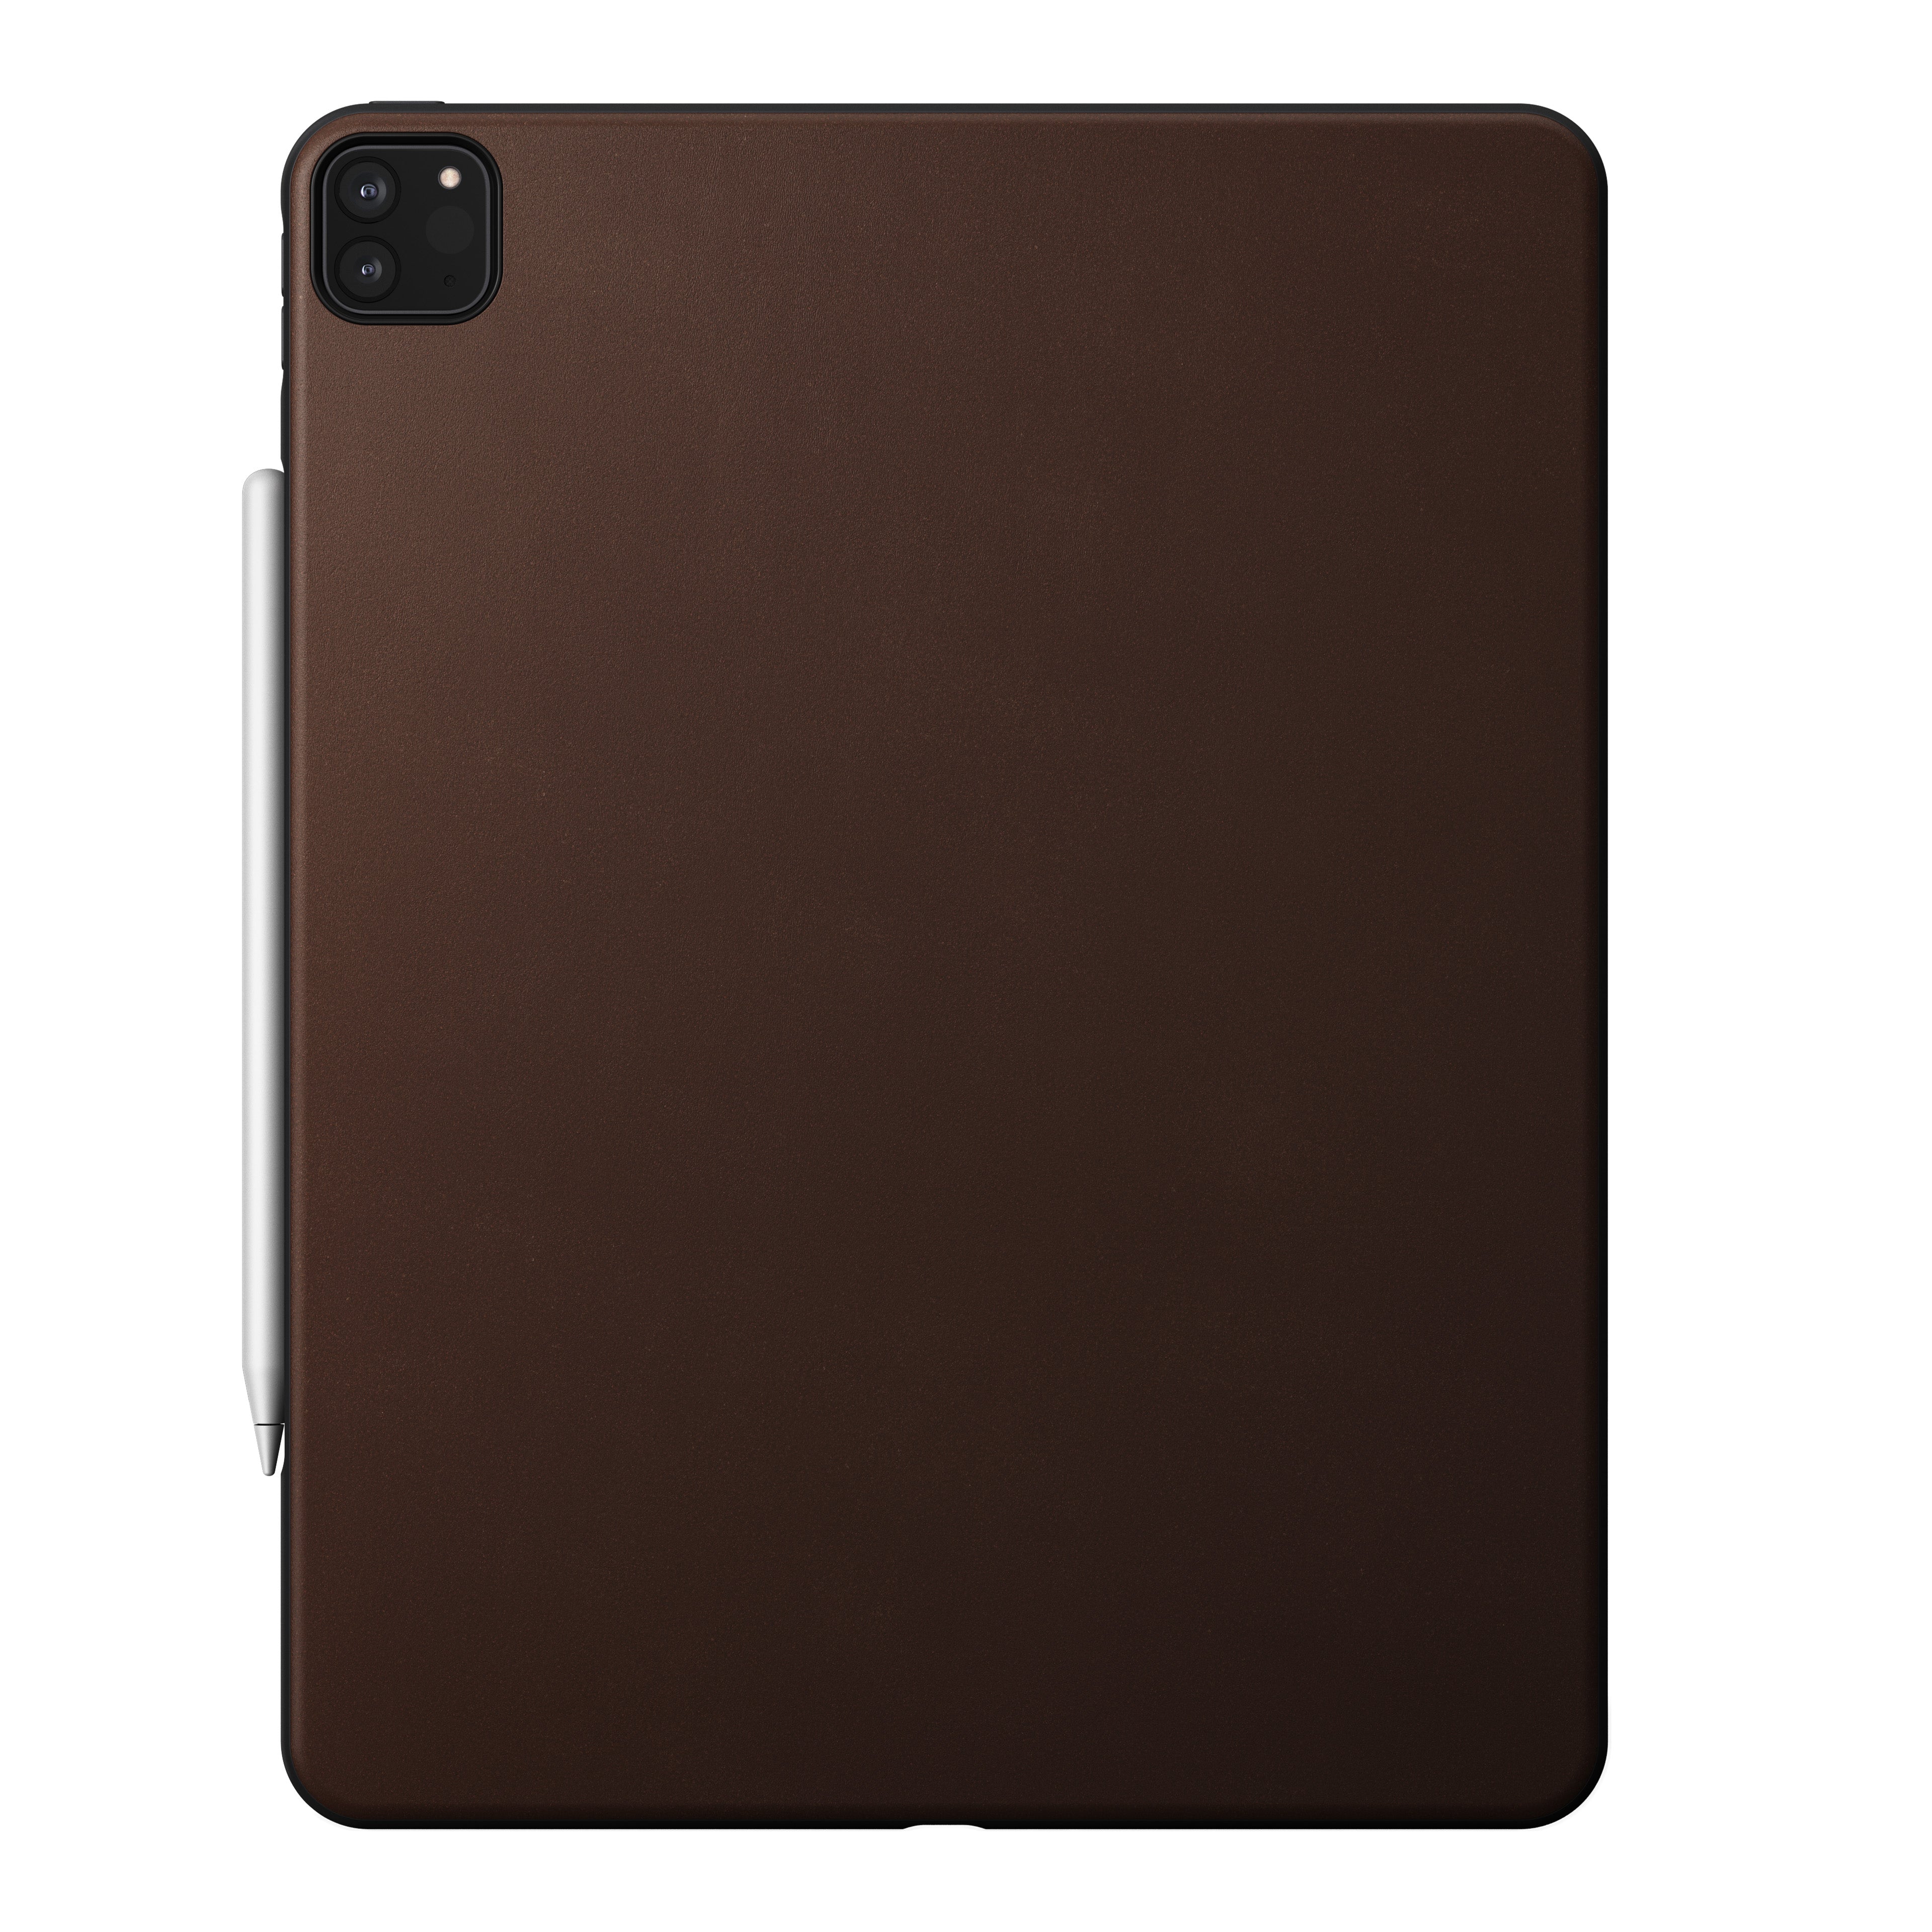 NOMAD Mordern Rugged ECCO Leather Case for iPad Pro 12.9"(2021) Default NOMAD Rustic Brown 